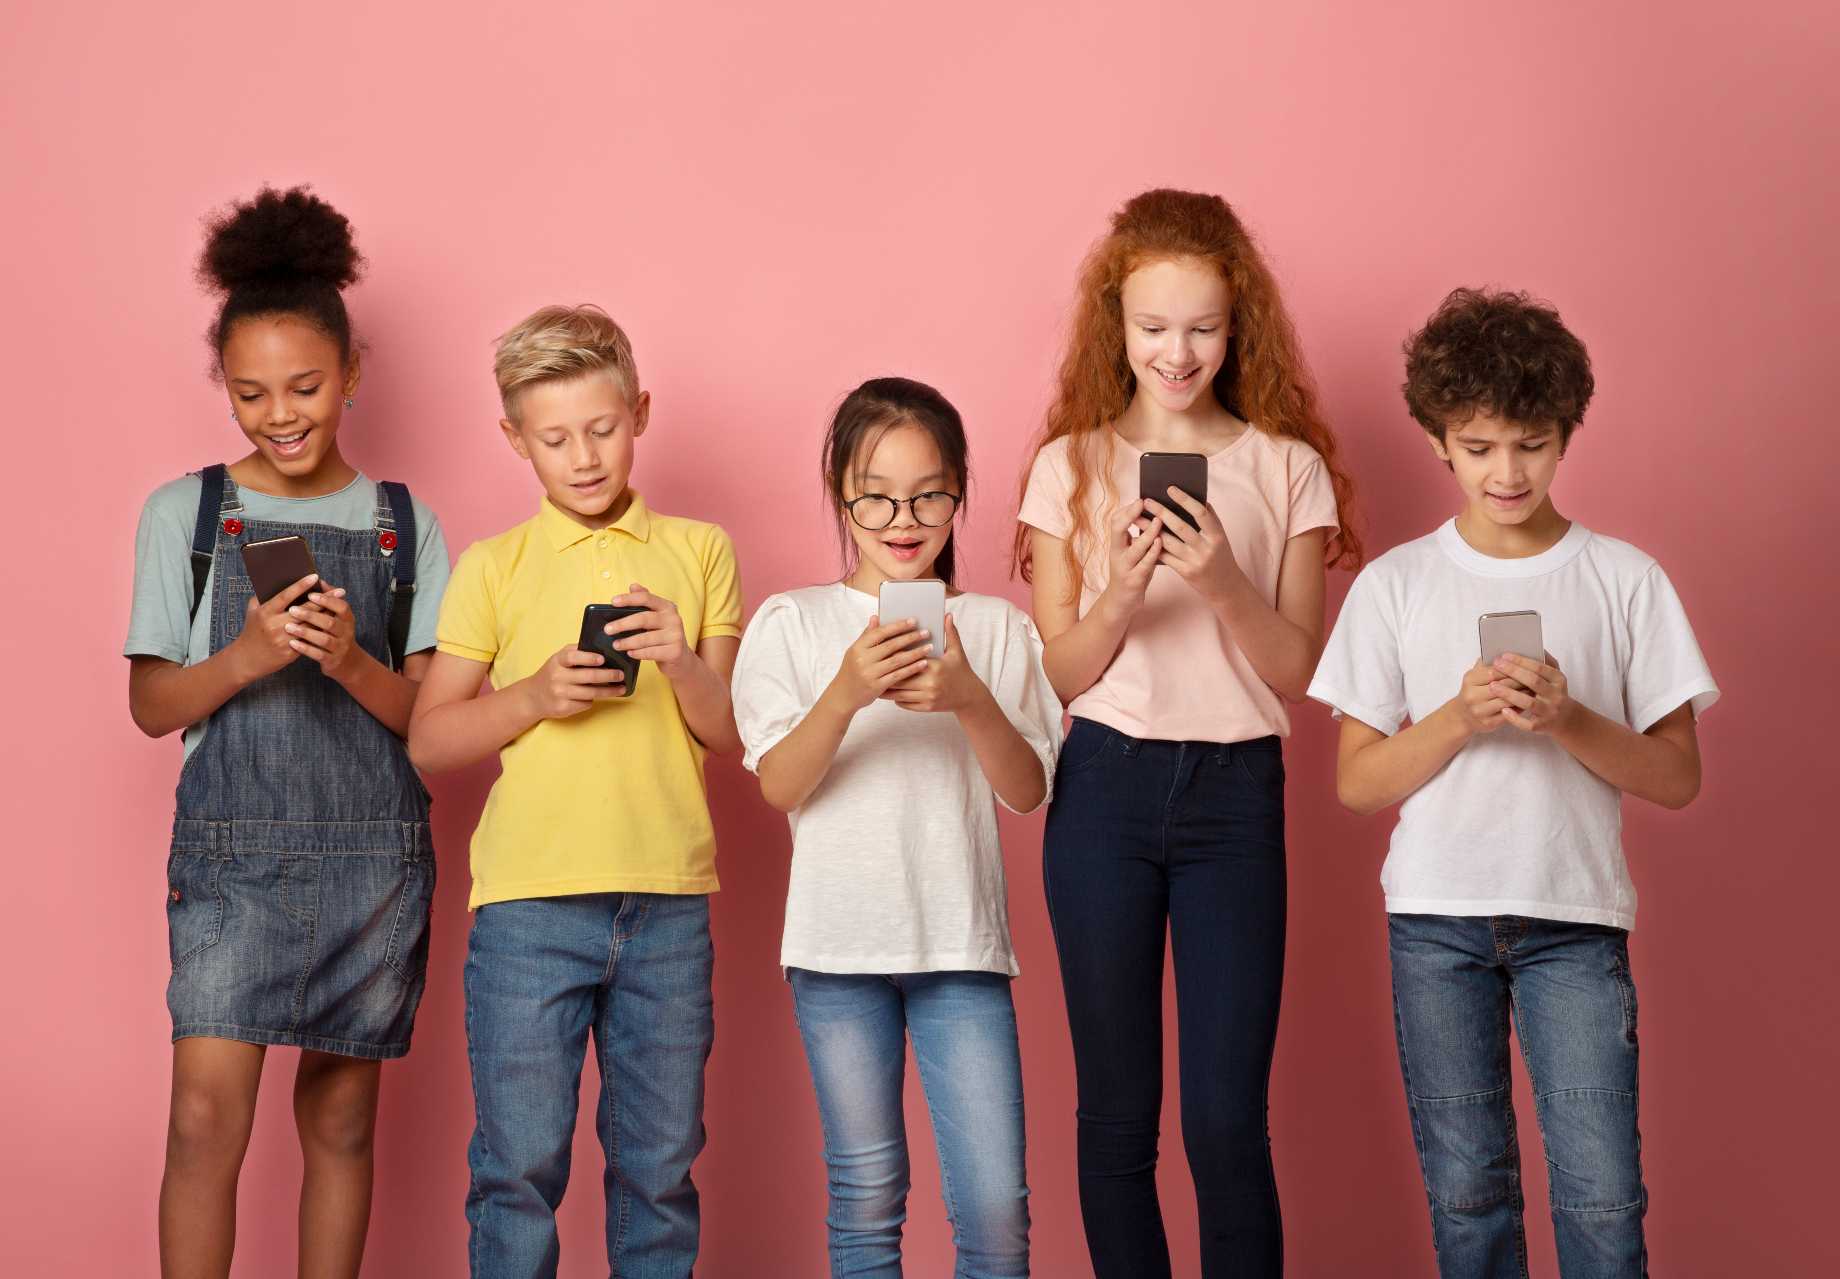 Is Your Child Ready for a Smartphone?